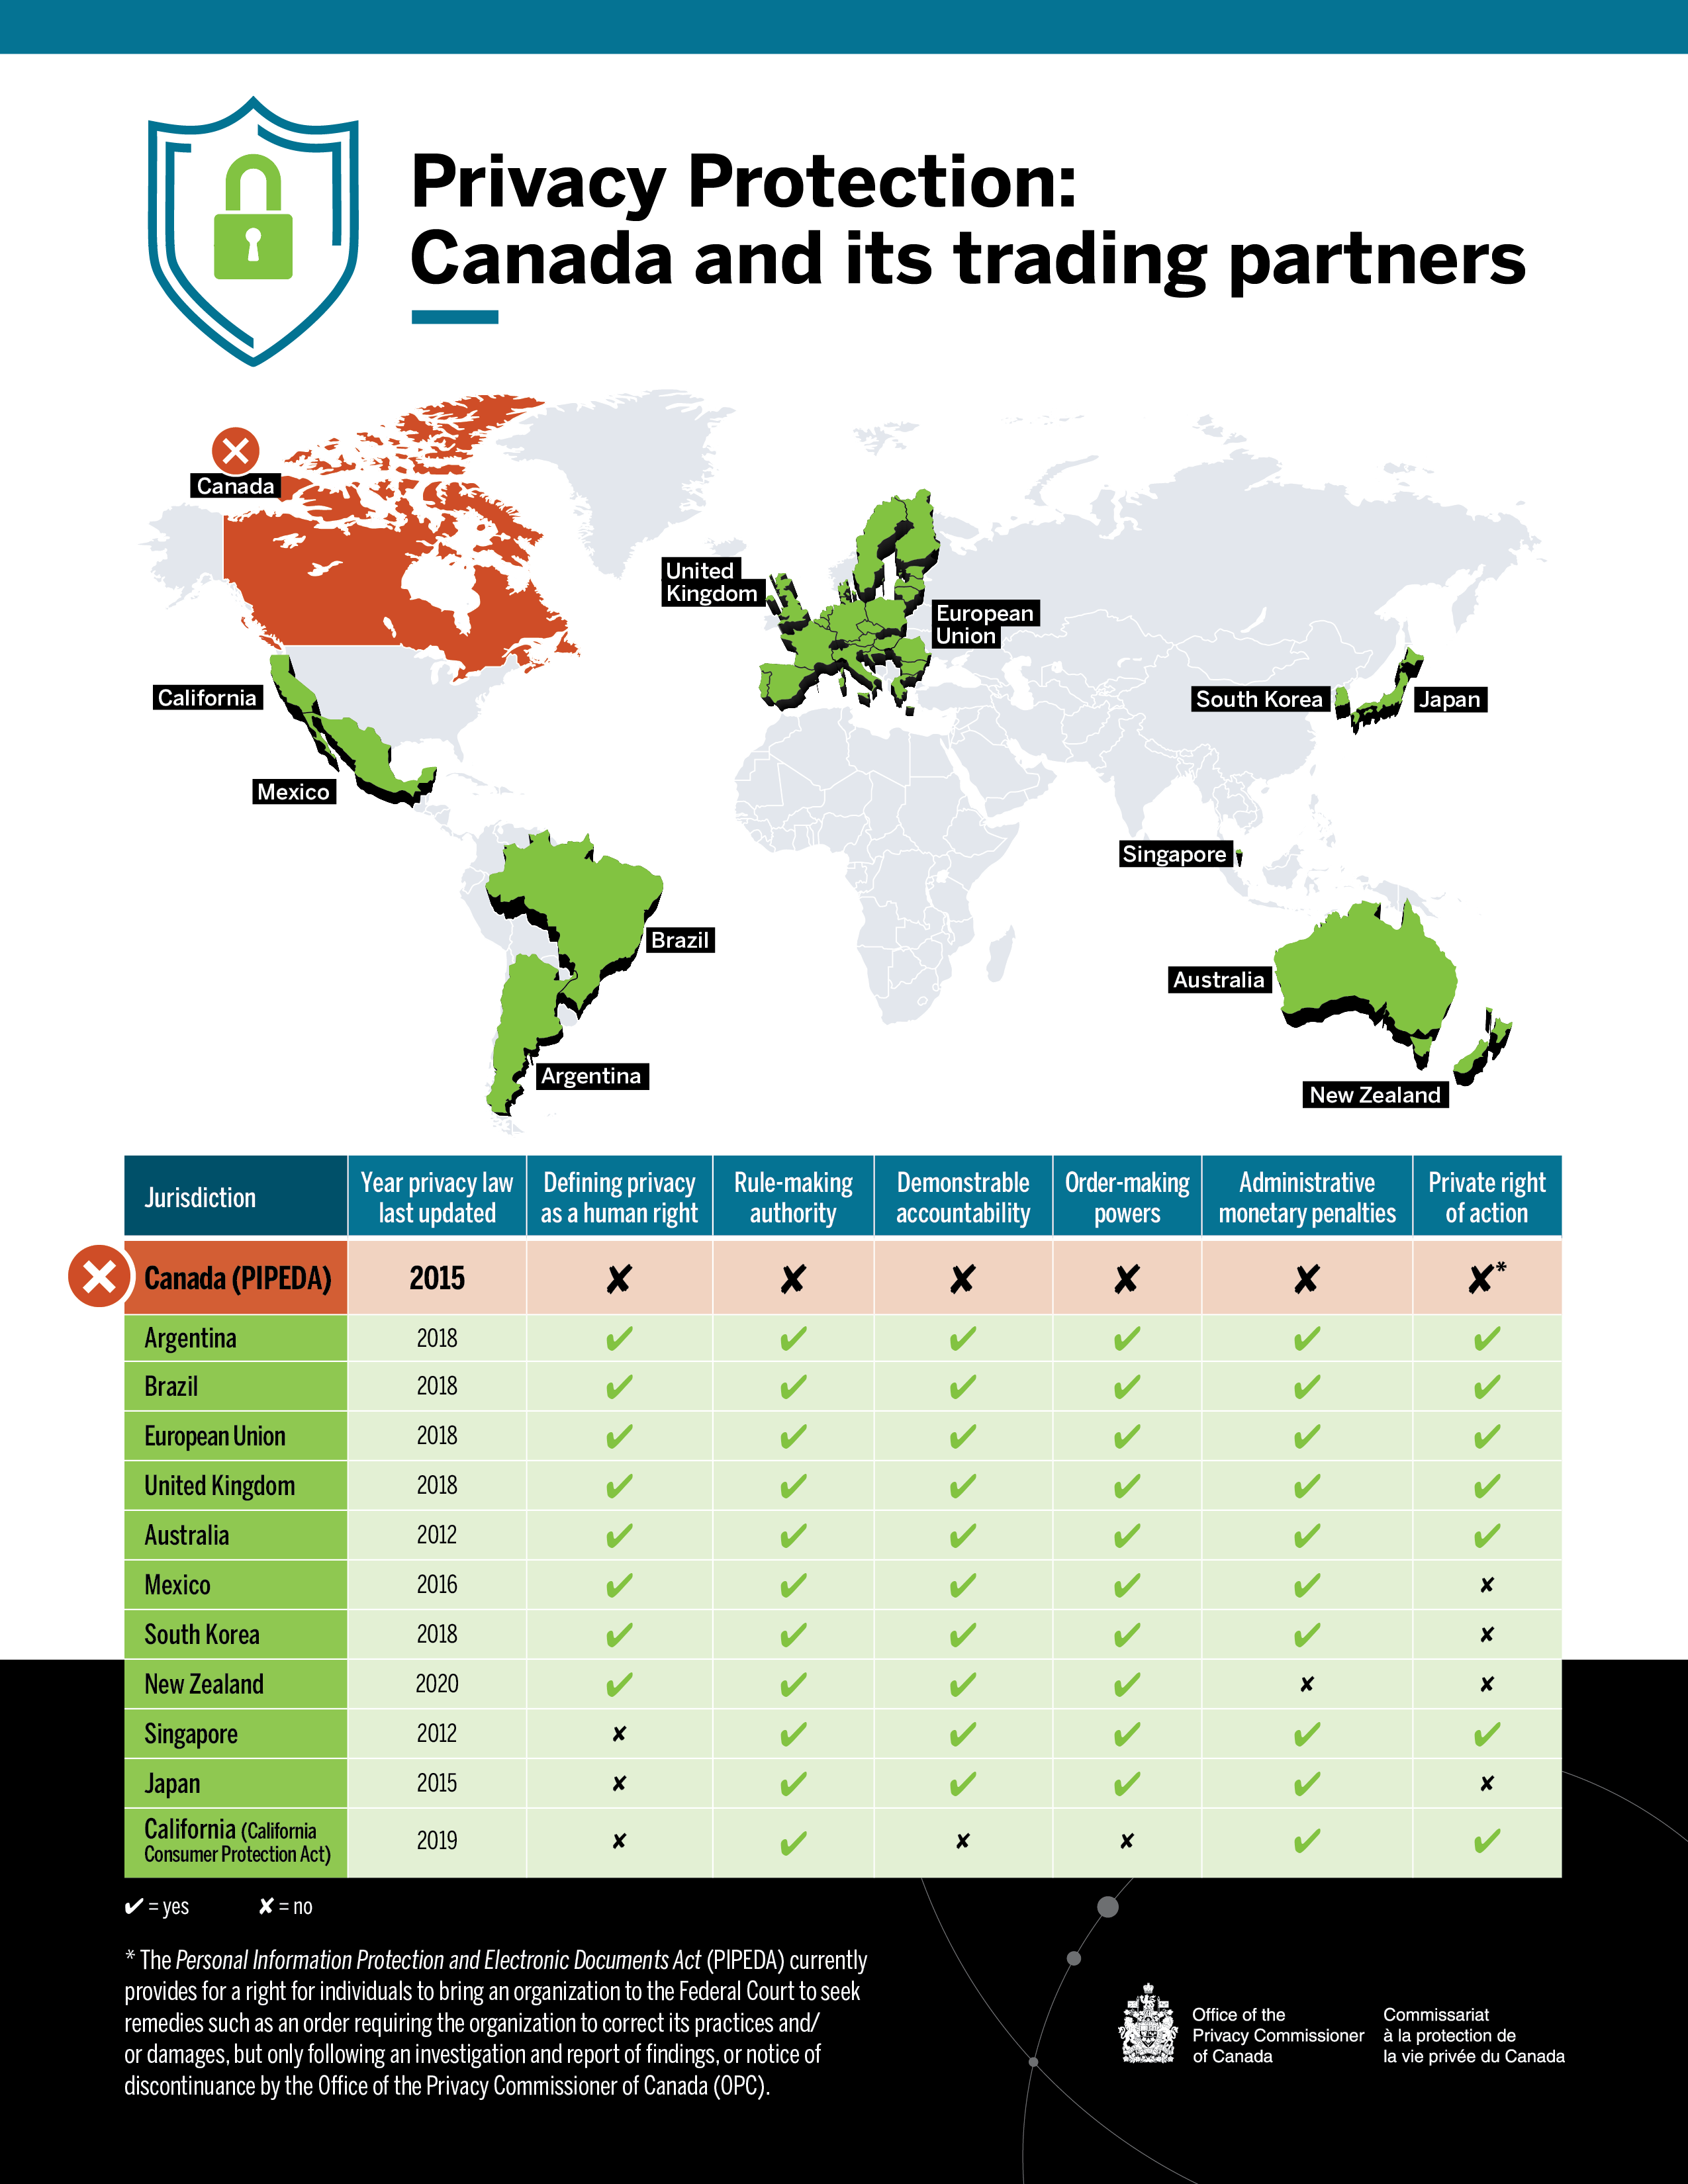 Figure 1: Privacy Protection: Canada and its trading partners: see text version.